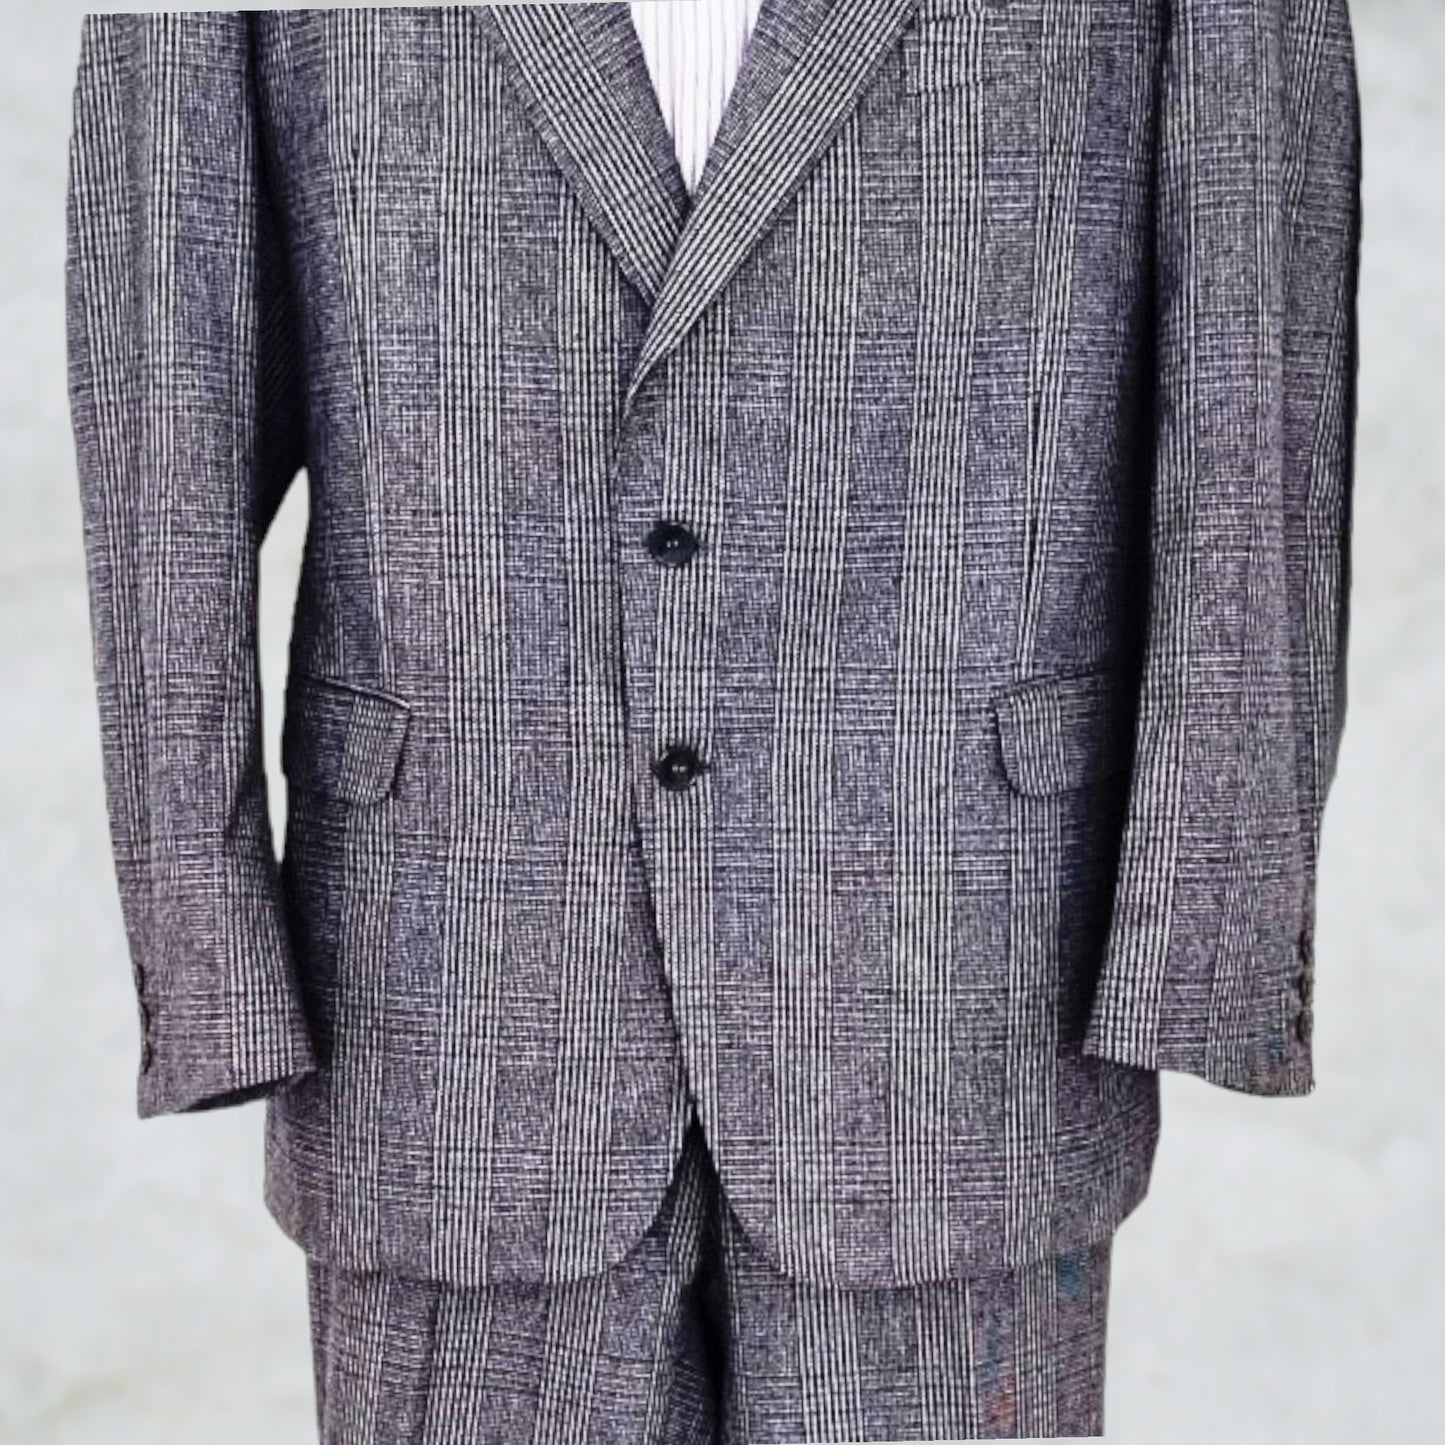 Bespoke Italian Tailored GreyTwo Piece Suit In Prince of Wales Check. Timeless Fashions